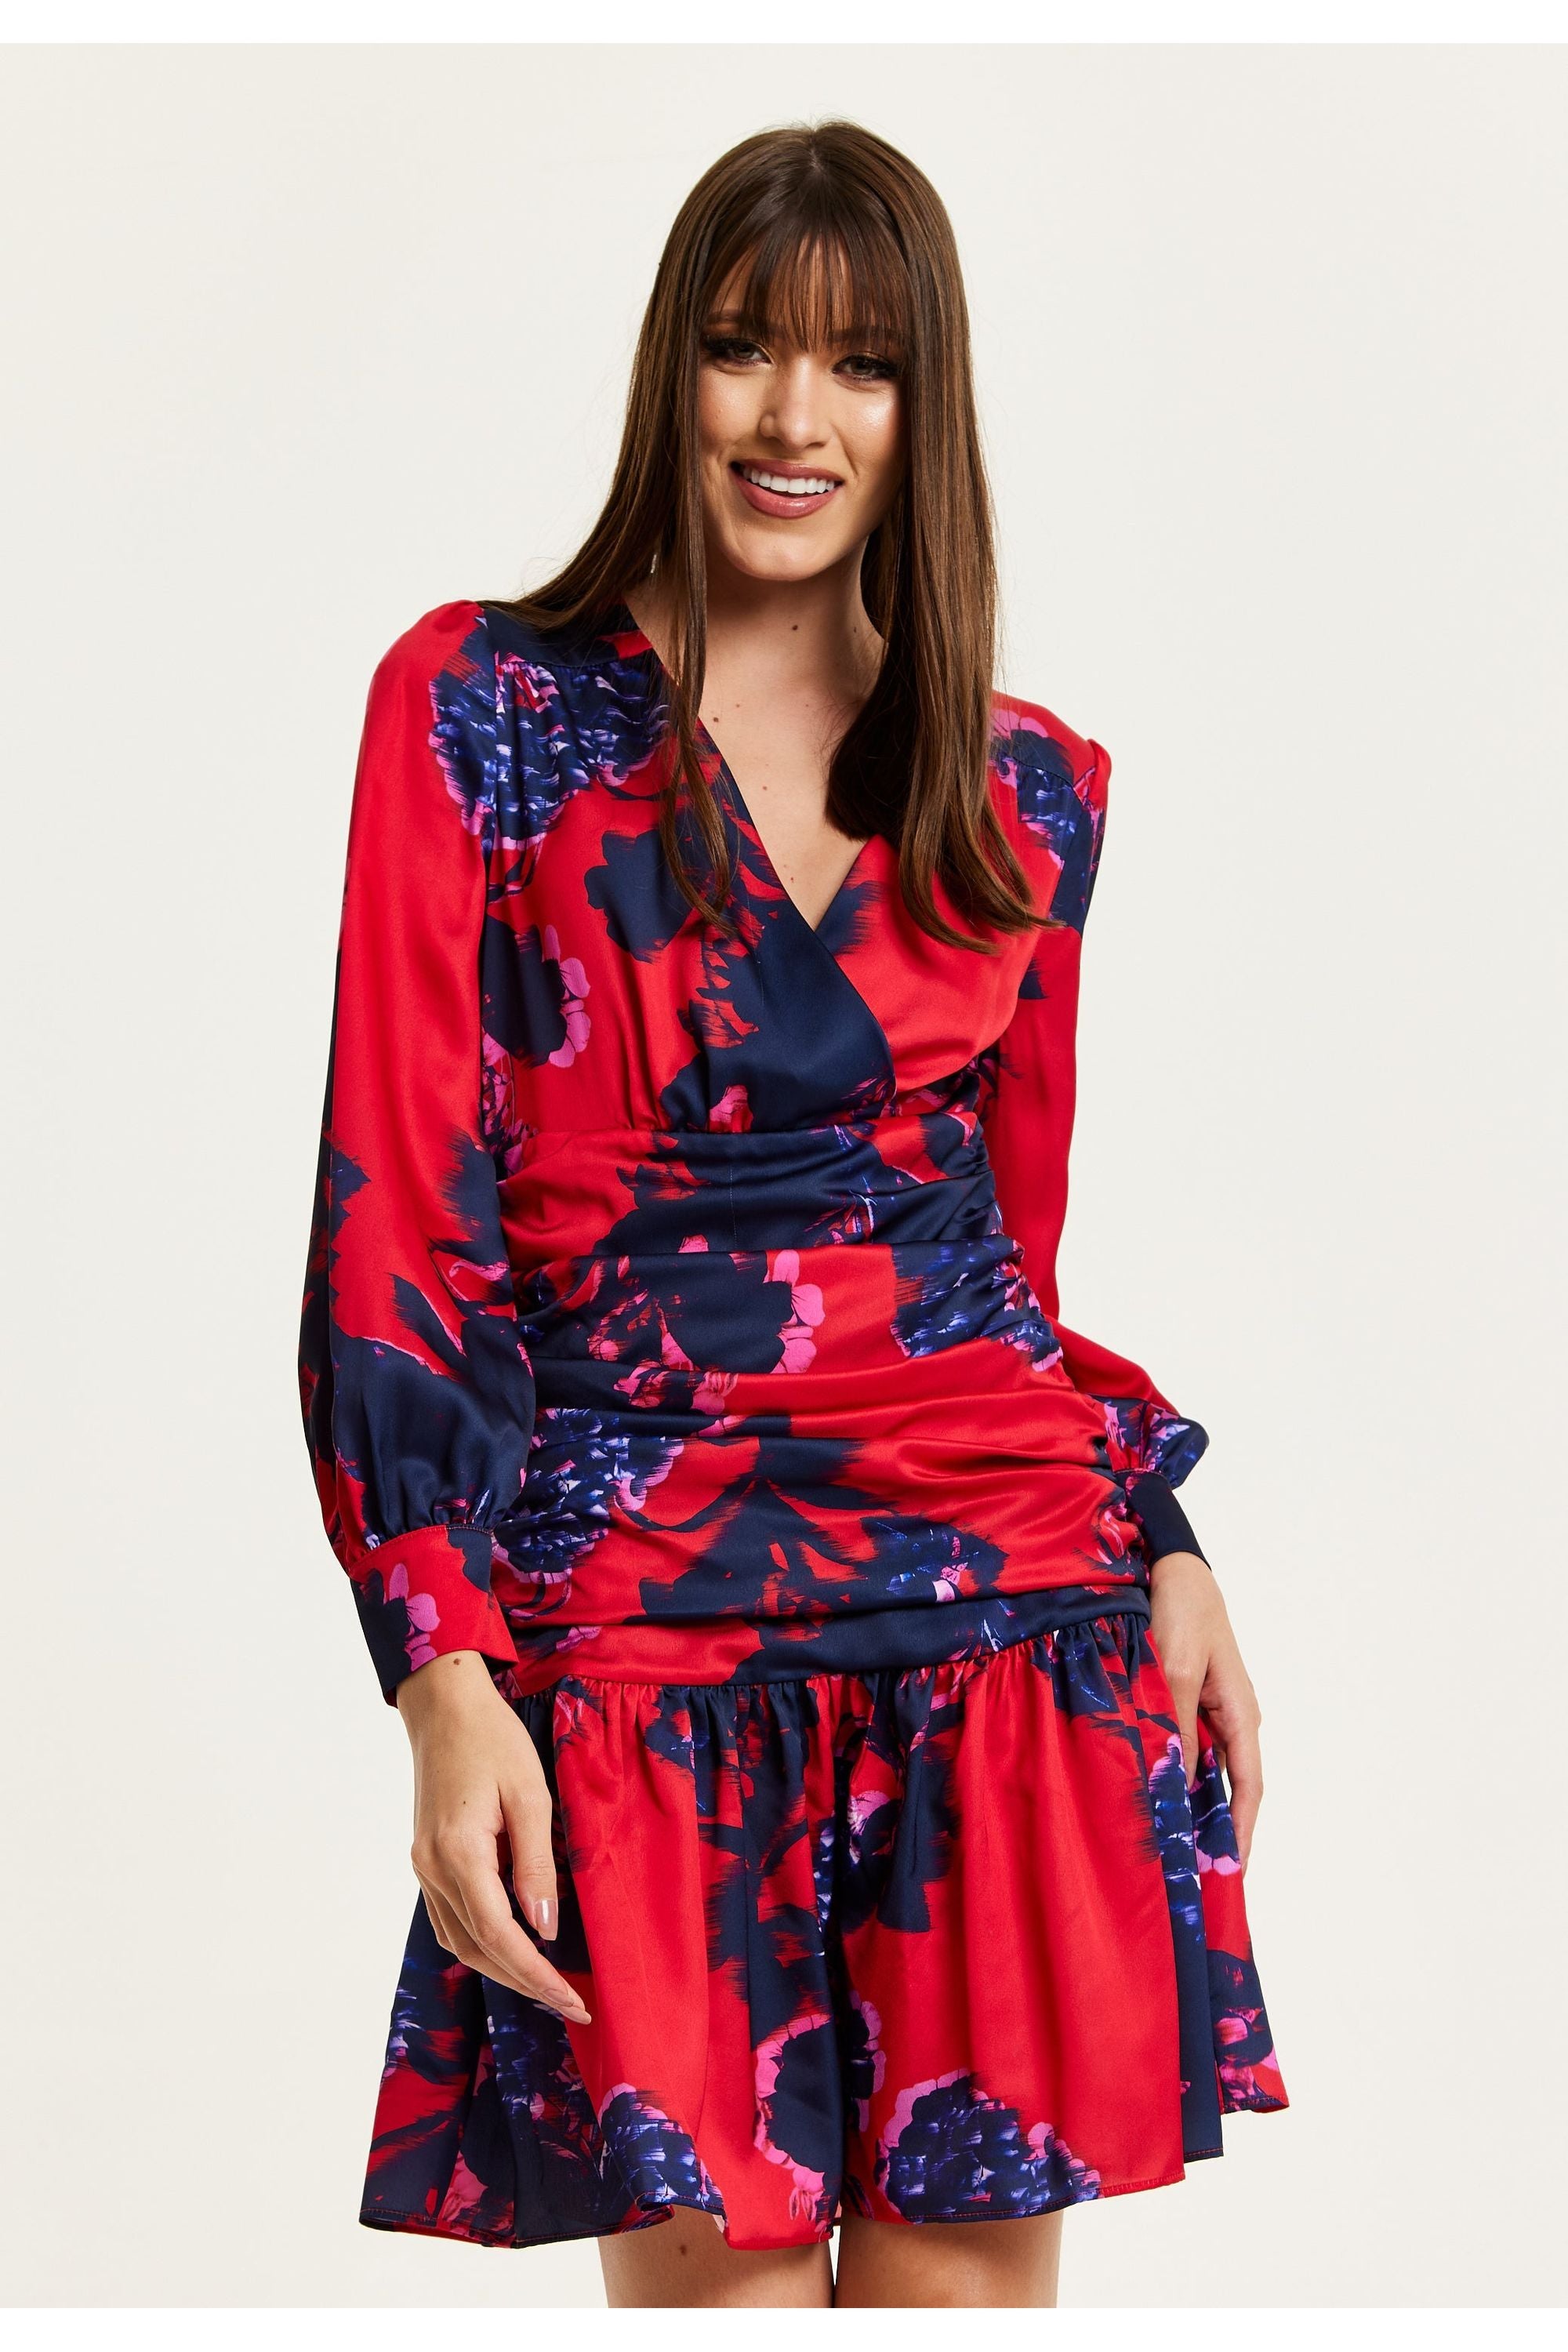 Floral Print Red Mini Dress With Long Sleeves G21-LIQ23AW011